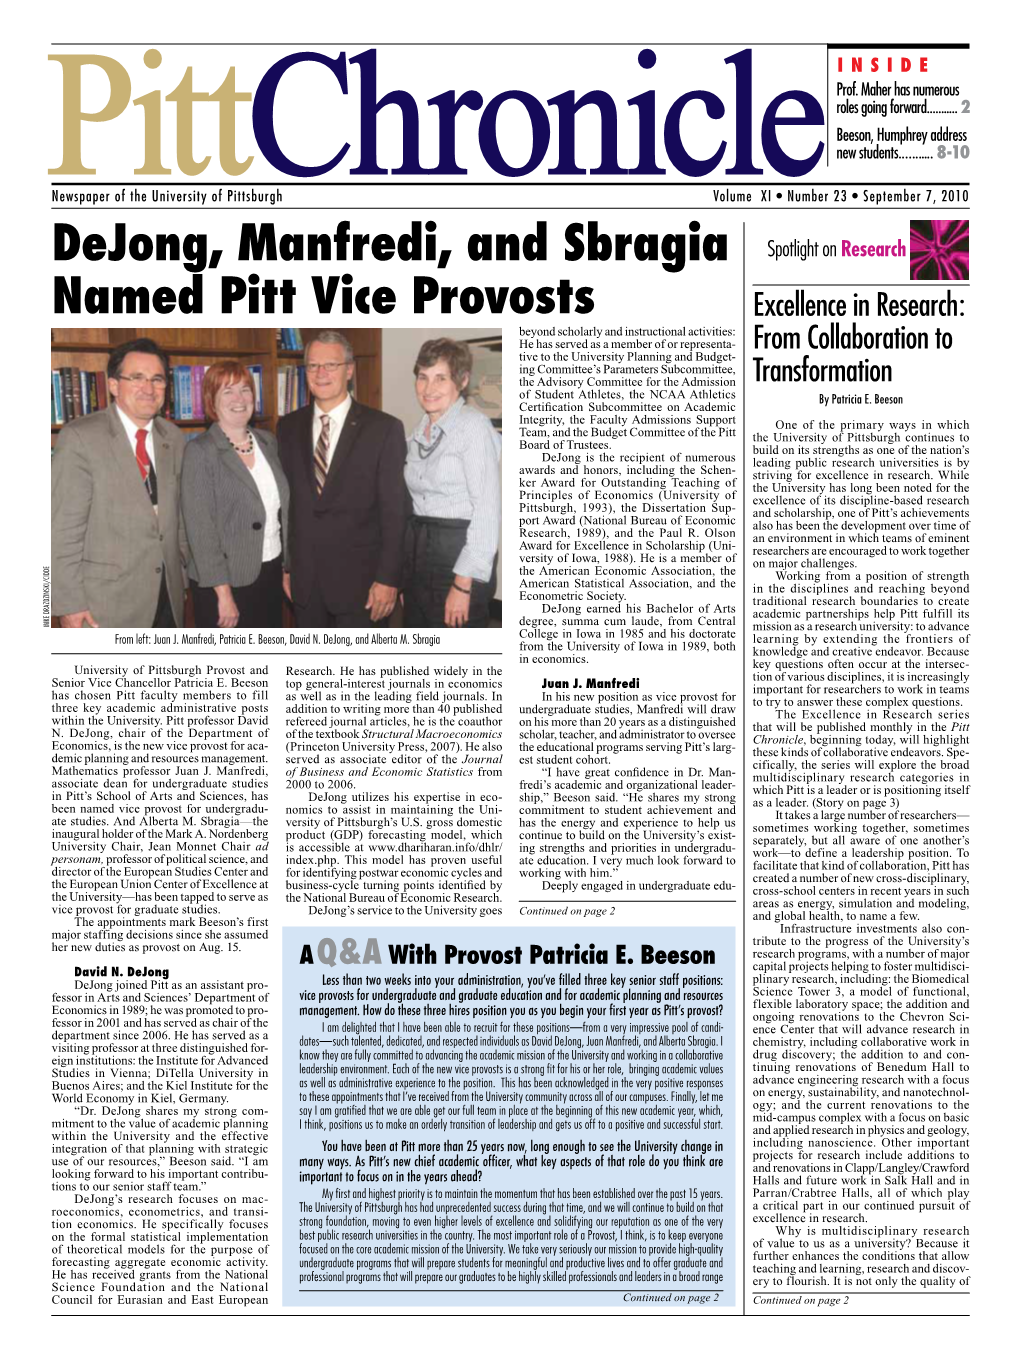 Download the Sept. 7, 2010, Issue of the Pitt